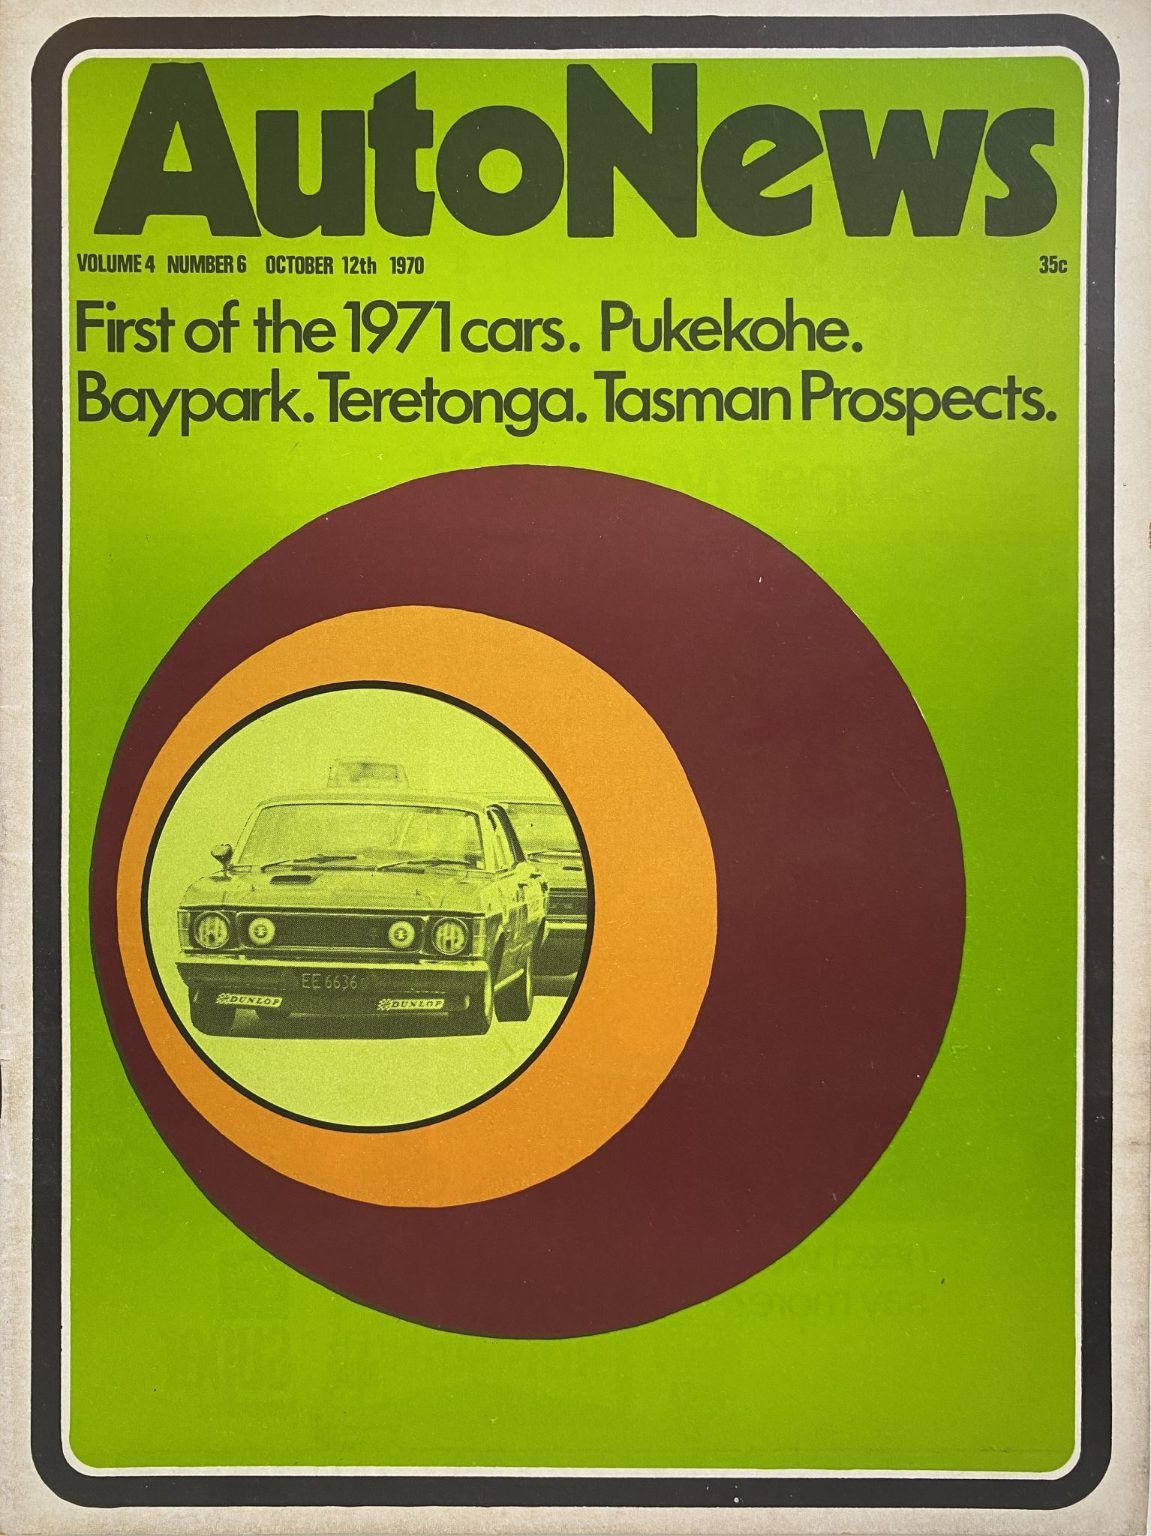 OLD MAGAZINE: Auto News - Vol. 4, Number 6, 12th October 1970